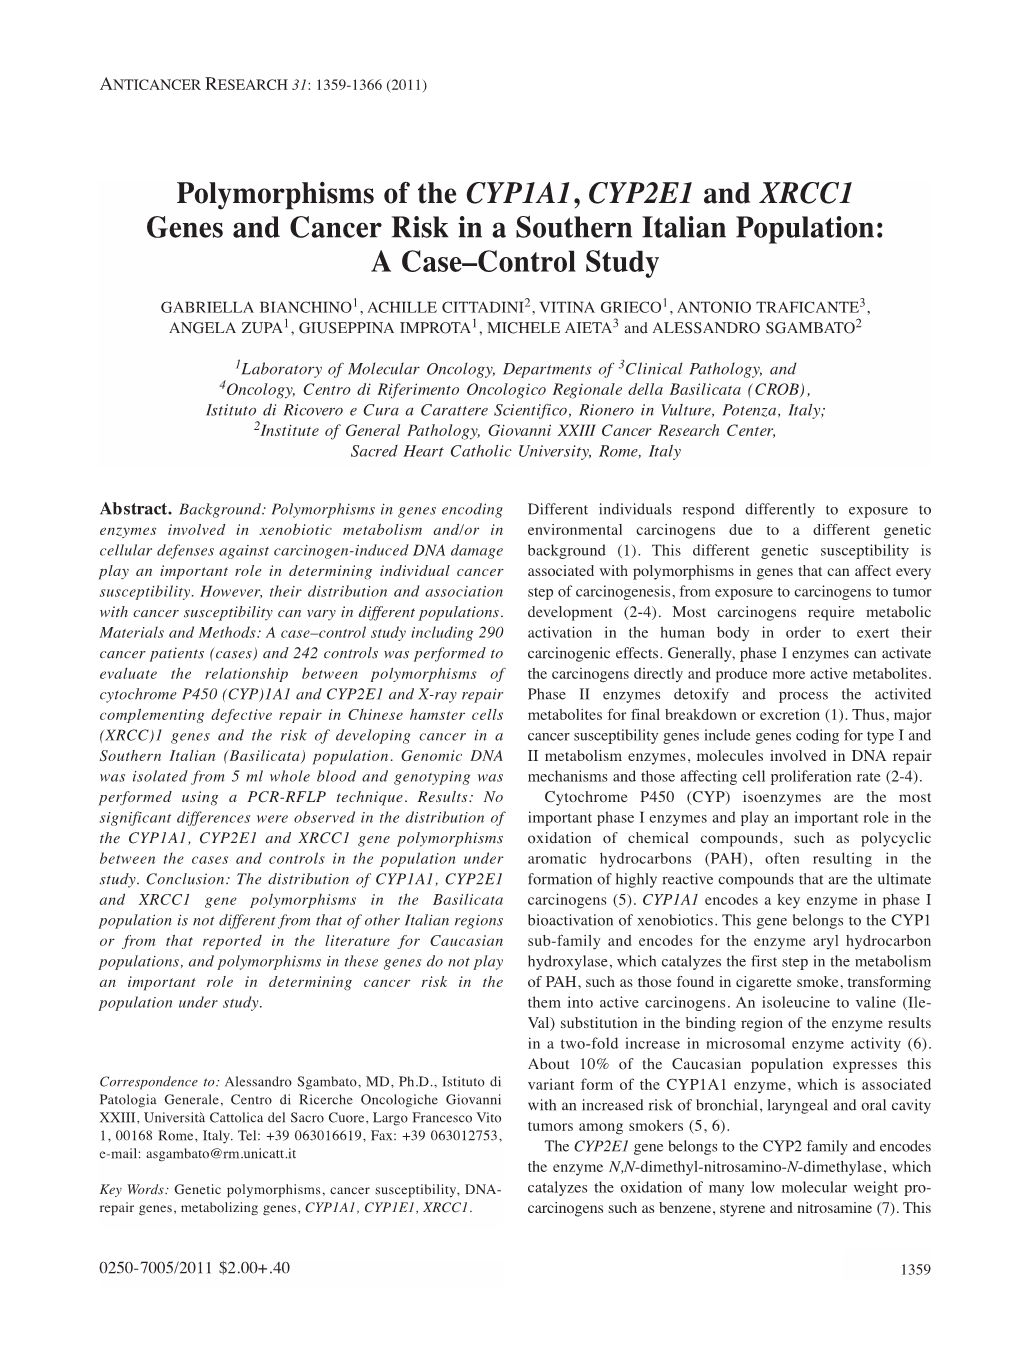 Polymorphisms of the CYP1A1, CYP2E1 and XRCC1 Genes and Cancer Risk in a Southern Italian Population: a Case–Control Study